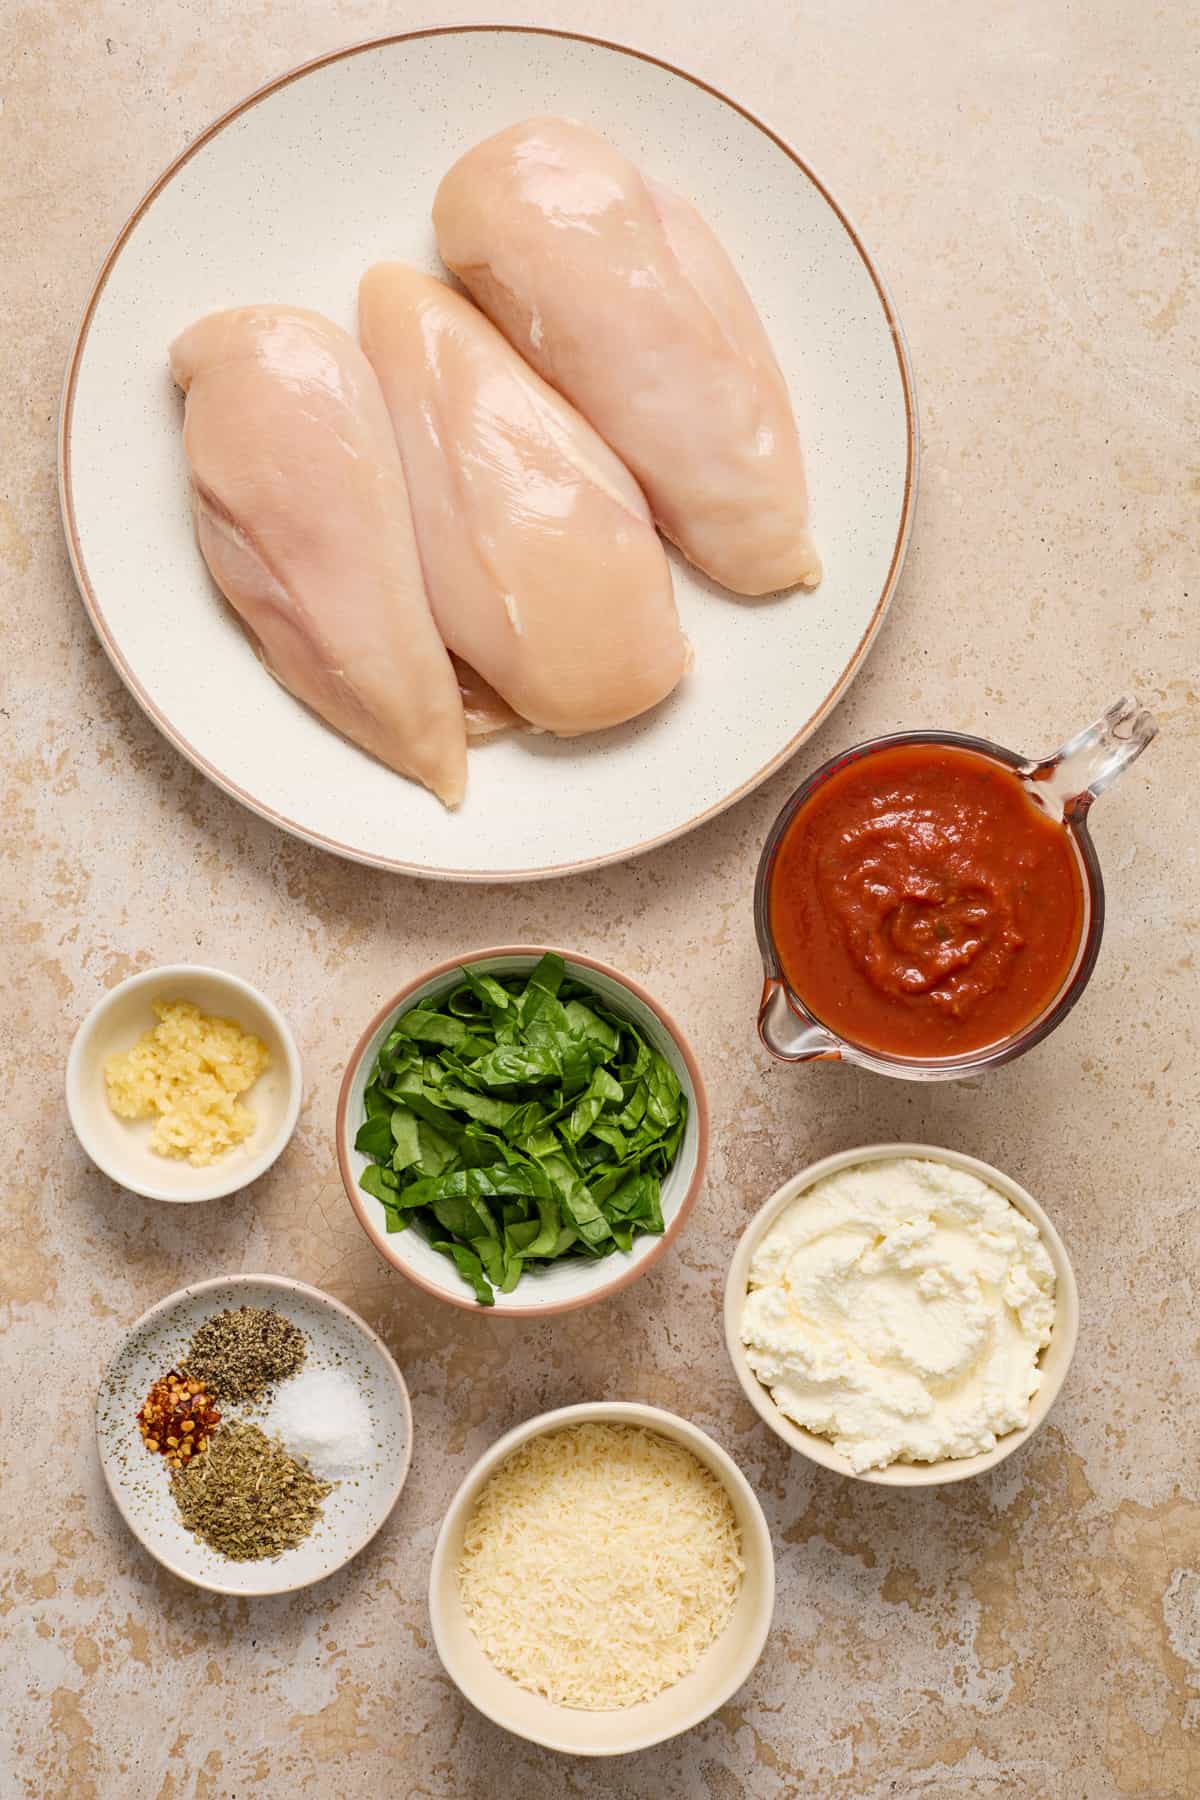 Chicken breast, marinara, spinach, parmesan and other ingredients on surface.